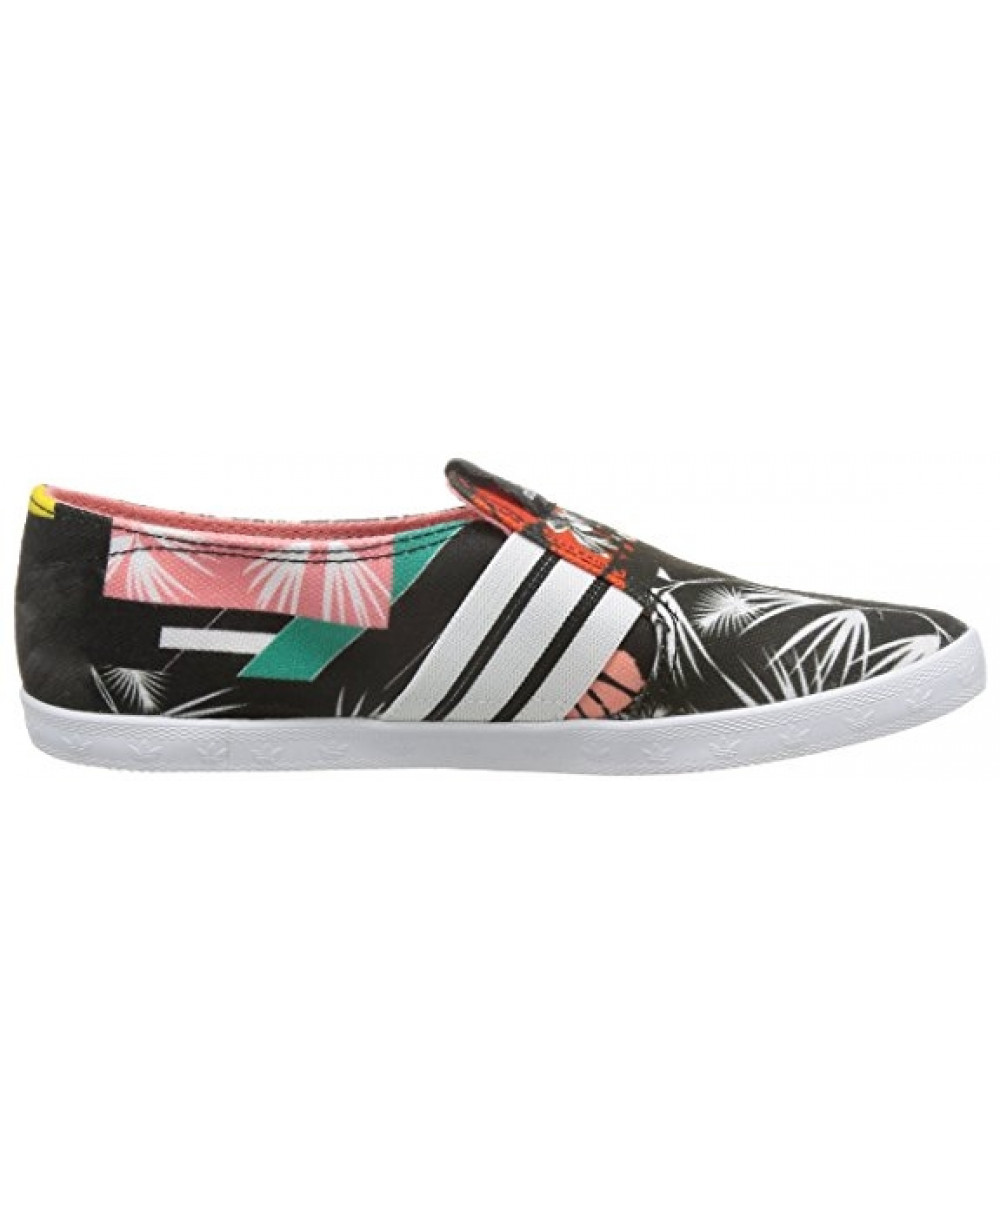 Adidas Adria Ps Floral Slip-On Shoes For Women S78867